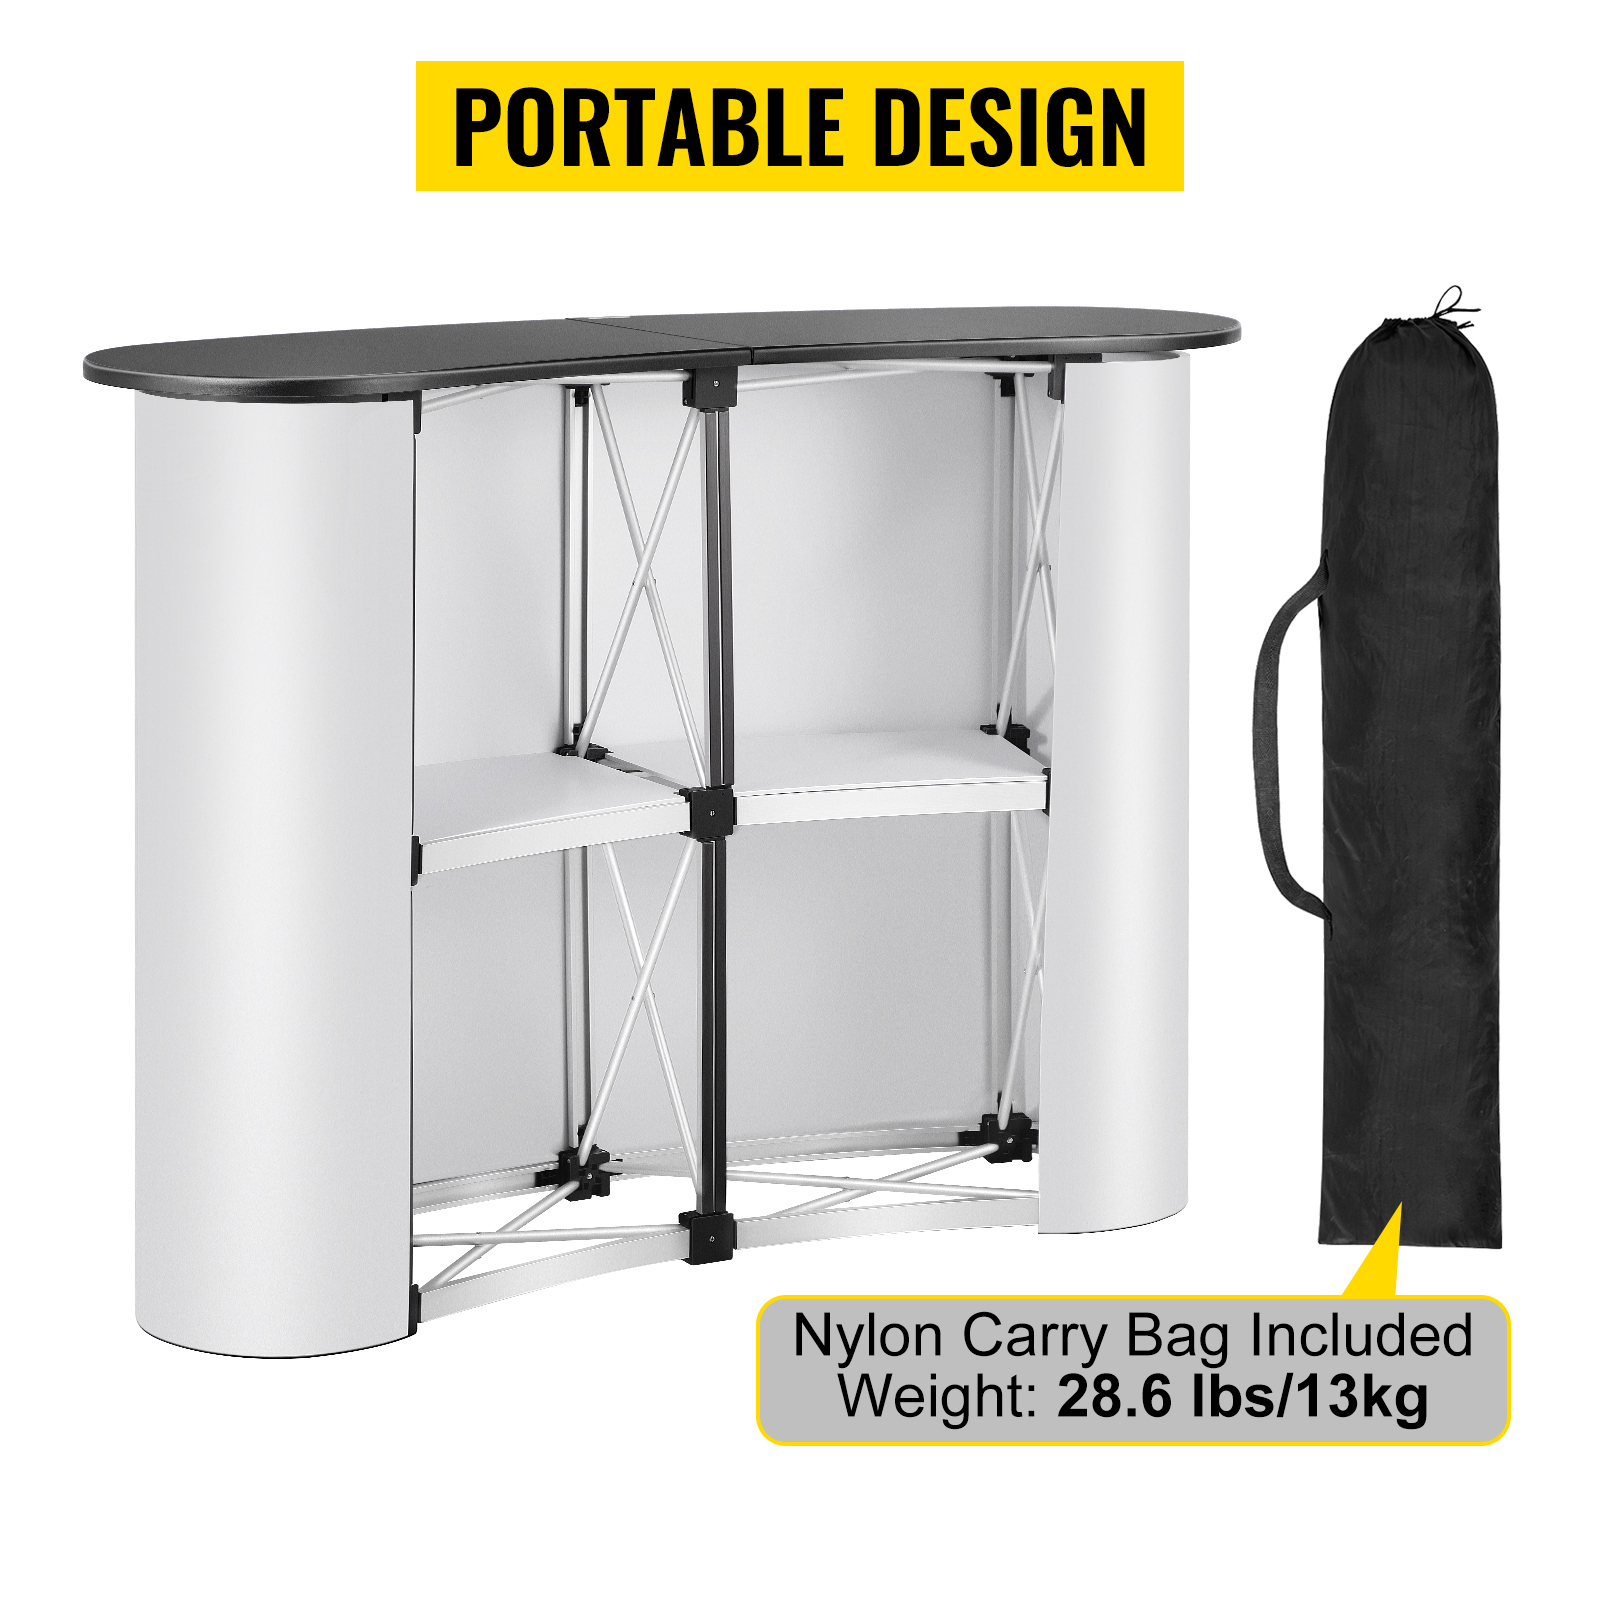 Portable Tradeshow Podium Table Pop Up Podium Counter Table Stand with 2 Storage Rack Promotion Retail Exhibition Trade Show Display 52 x 16 x 35 